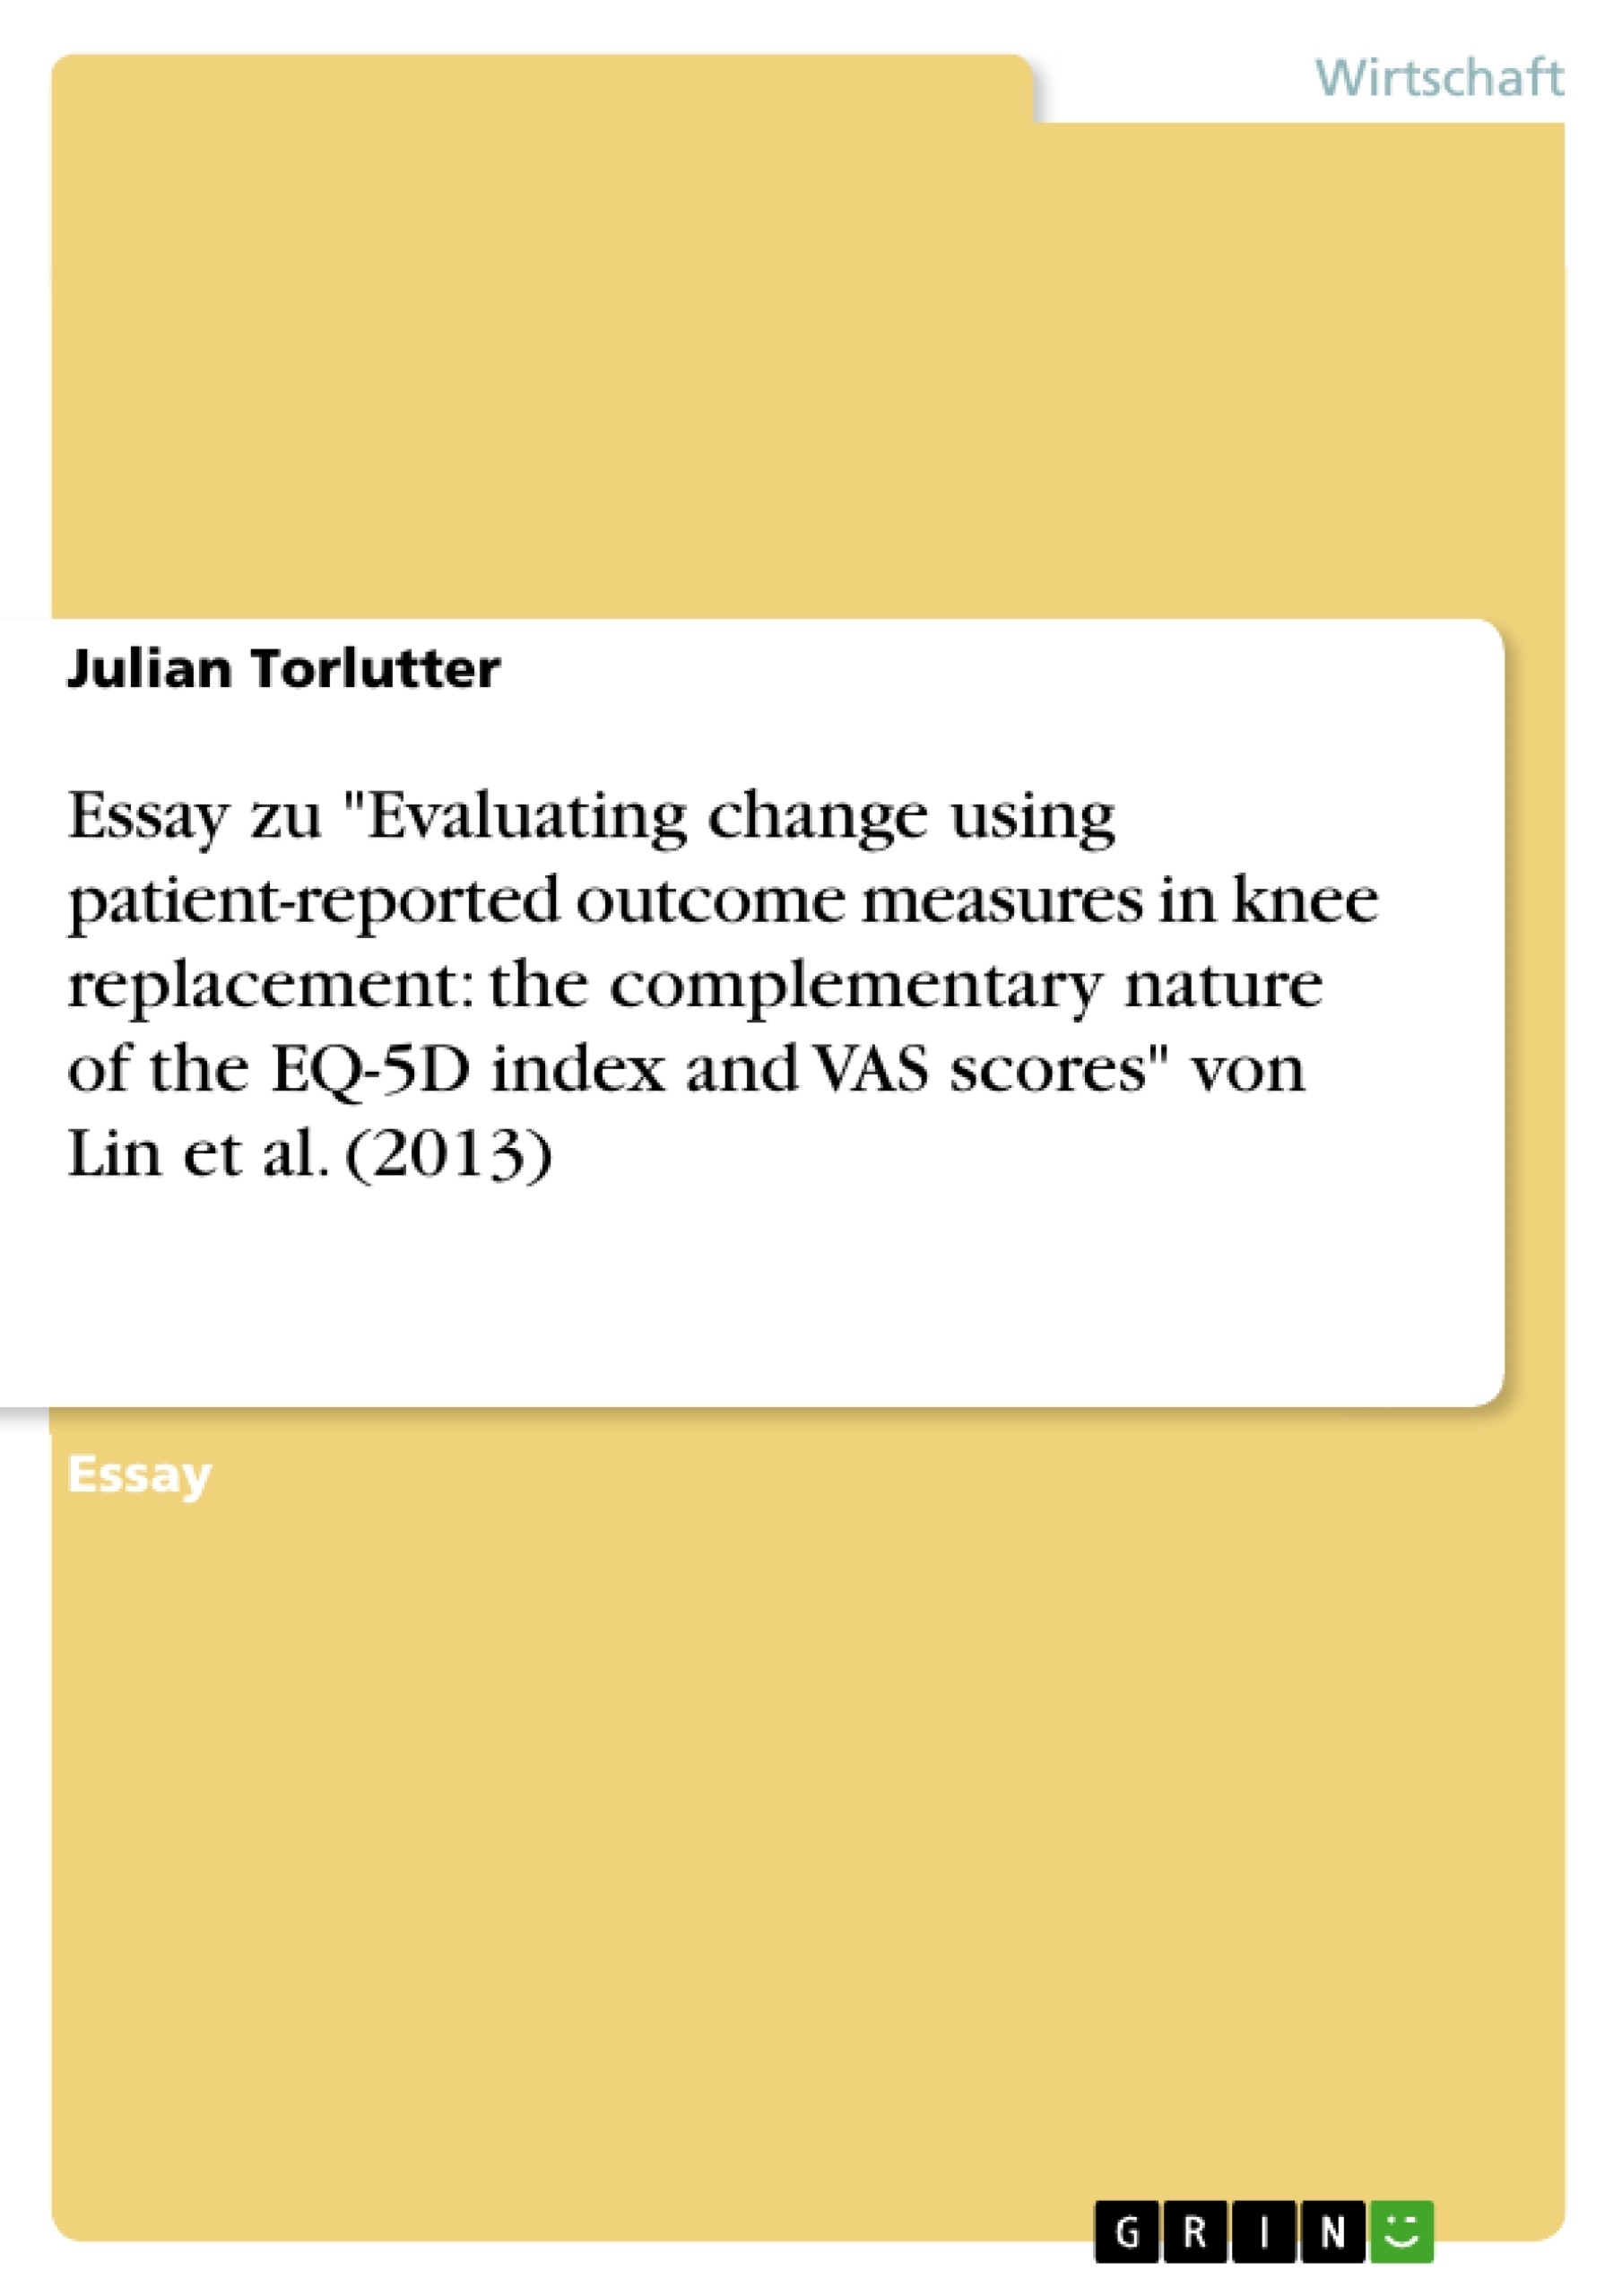 Título: Essay zu "Evaluating change using patient-reported outcome measures in knee replacement: the complementary nature of the EQ-5D index and VAS scores" von Lin et al. (2013)